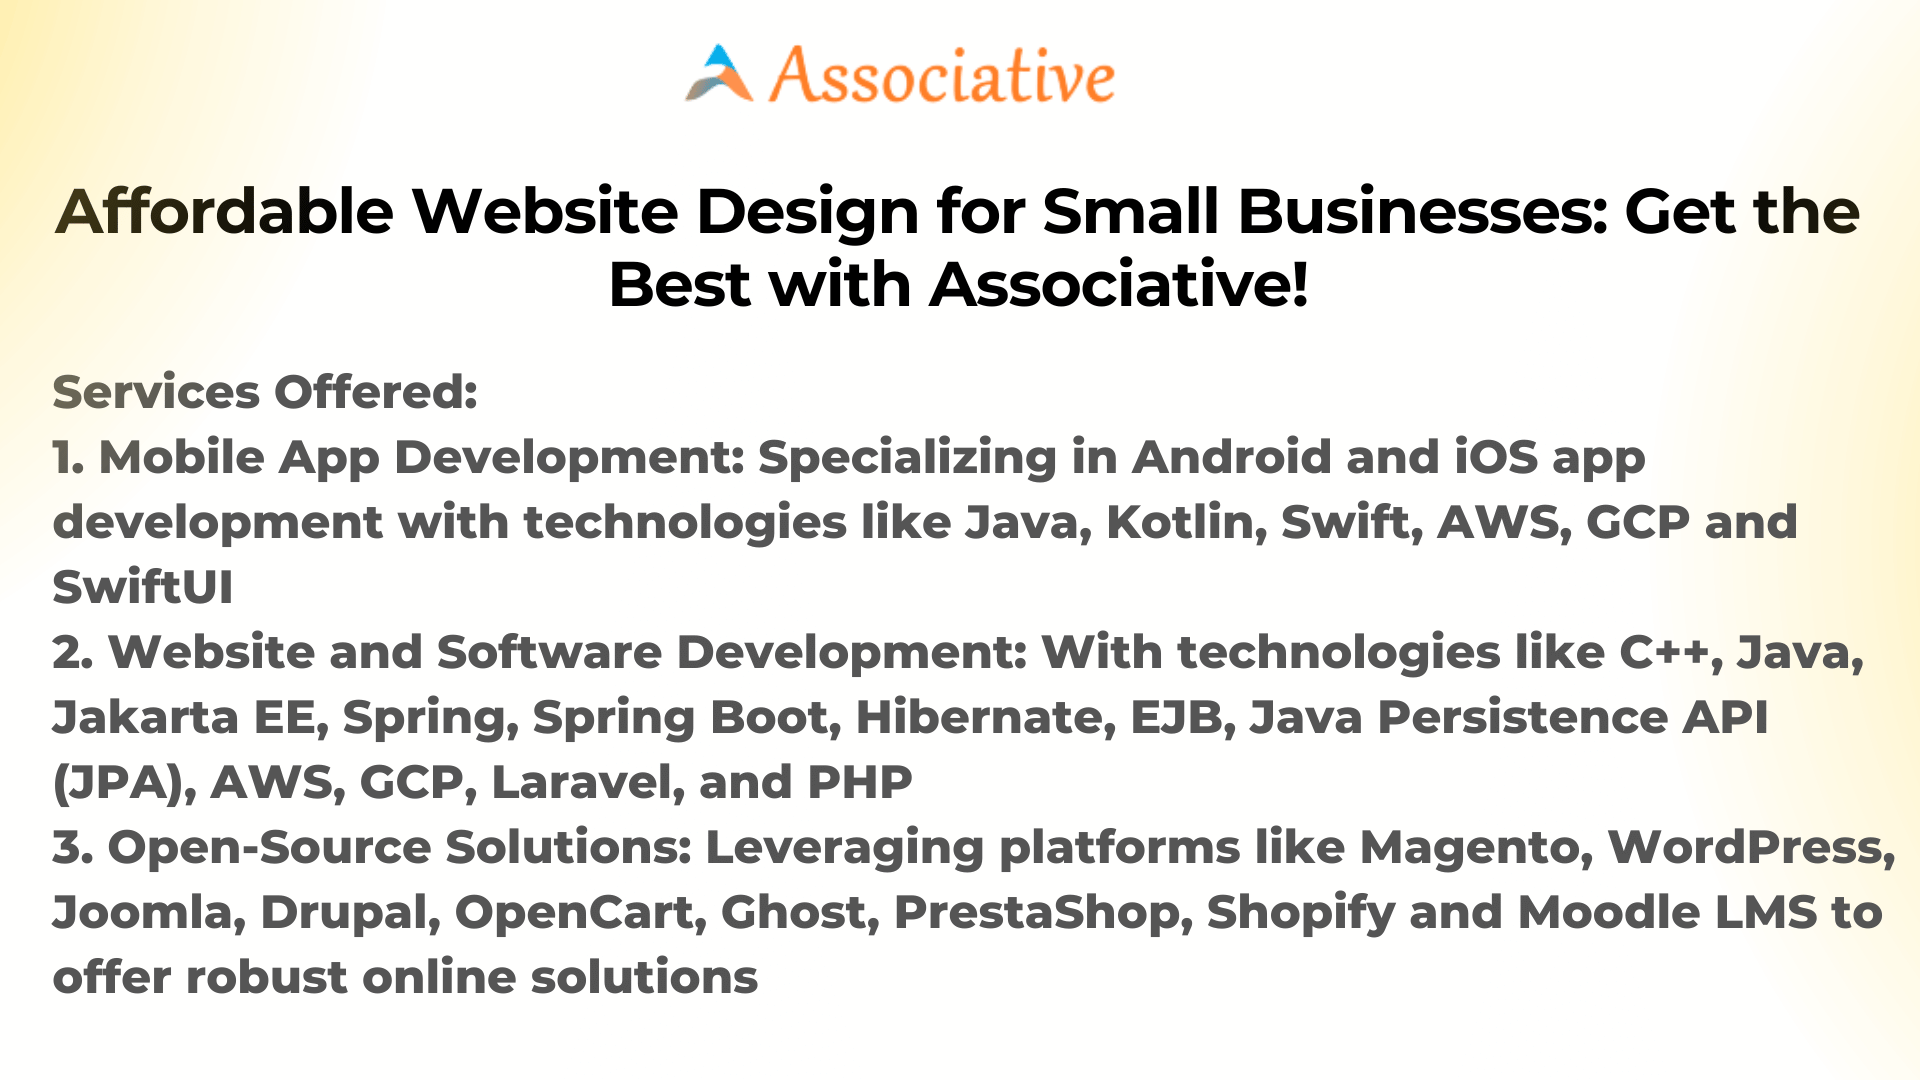 Affordable Website Design for Small Businesses Get the Best with Associative!